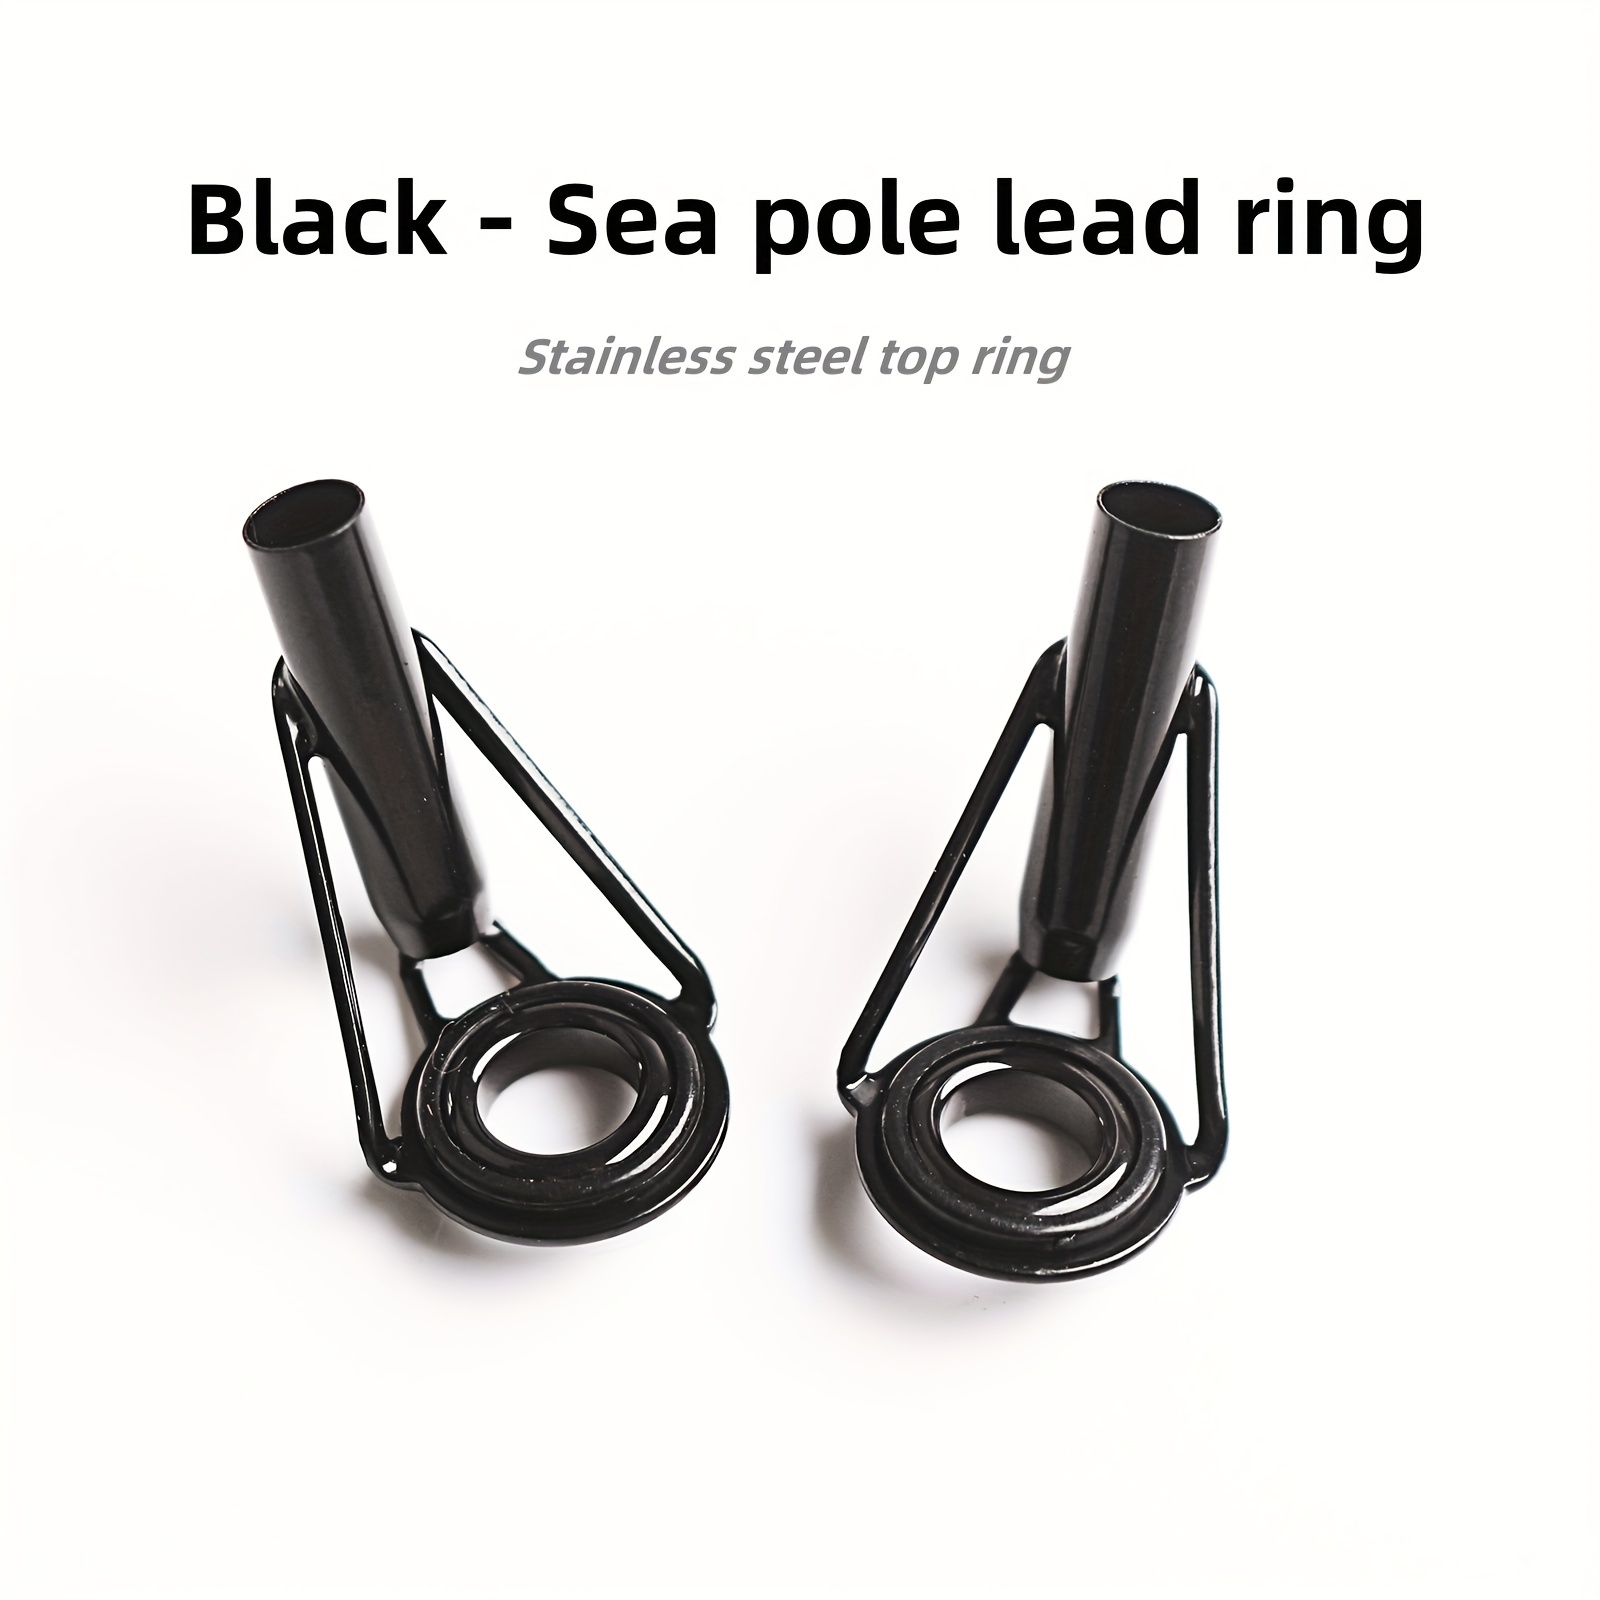 DURABLE FOR FISHING Rod Repair Tool Stainless Steel Frame Ceramic Ring  $10.11 - PicClick AU